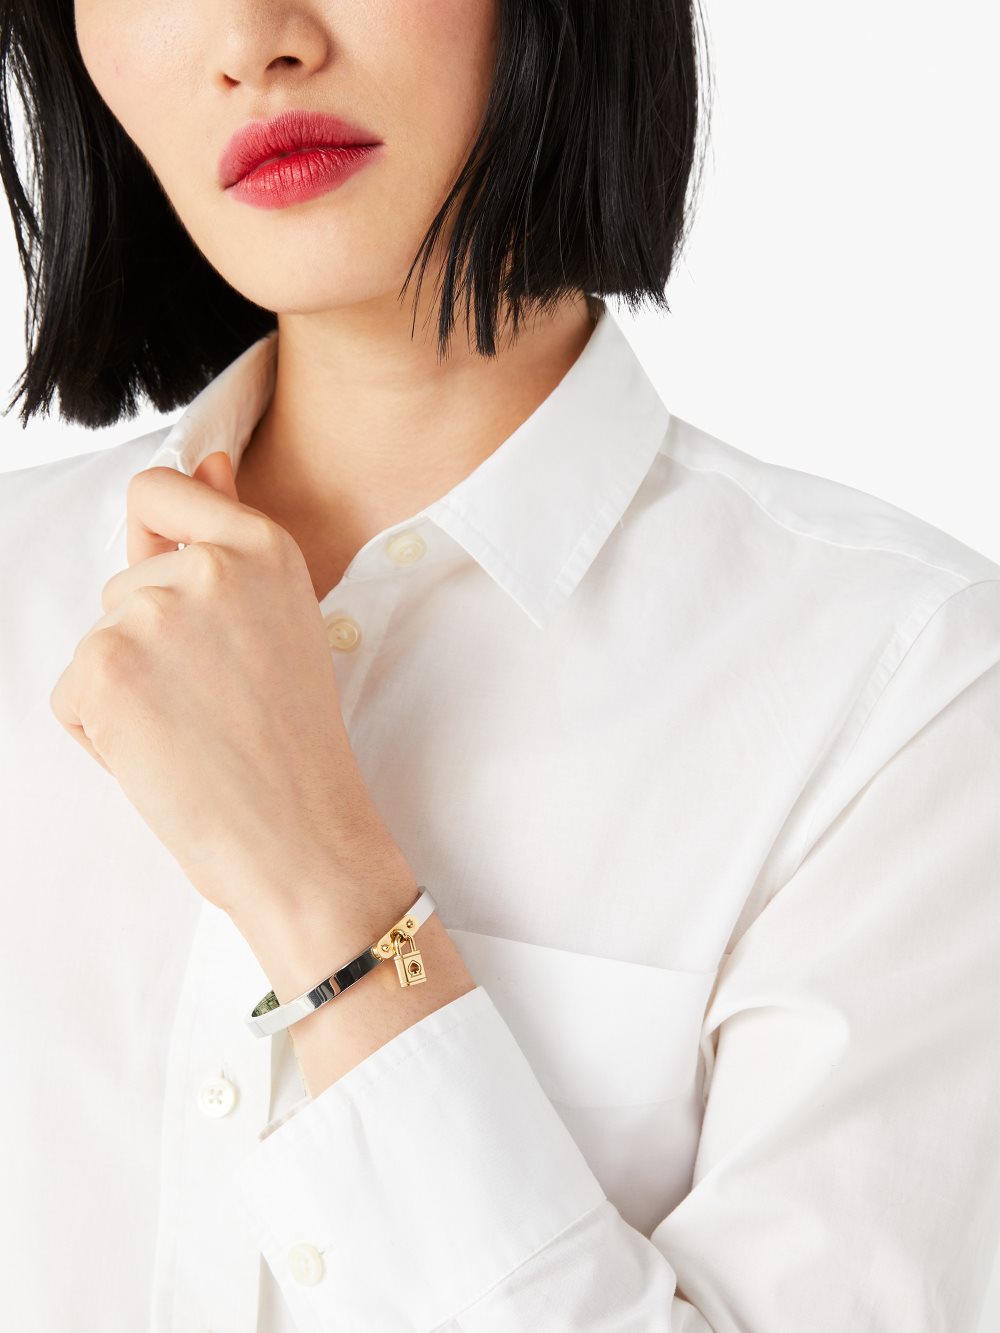 Women's silver gold lock and spade charm bangle | Kate Spade